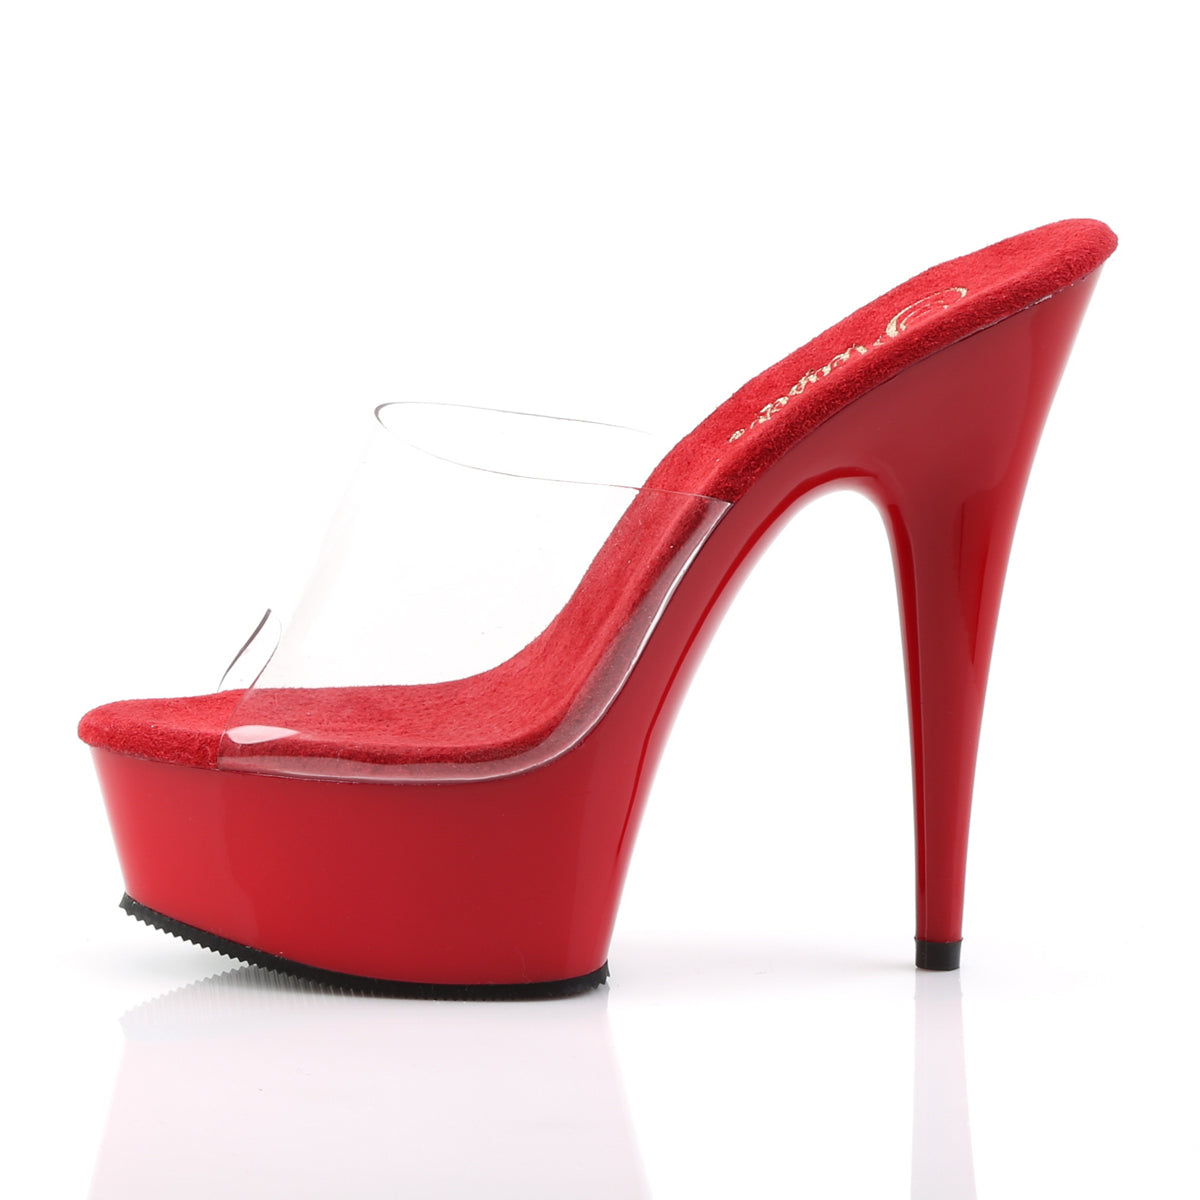 DELIGHT-601 6 Inch Heel Clear and Red Pole Dancing Platforms-Pleaser- Sexy Shoes Pole Dance Heels